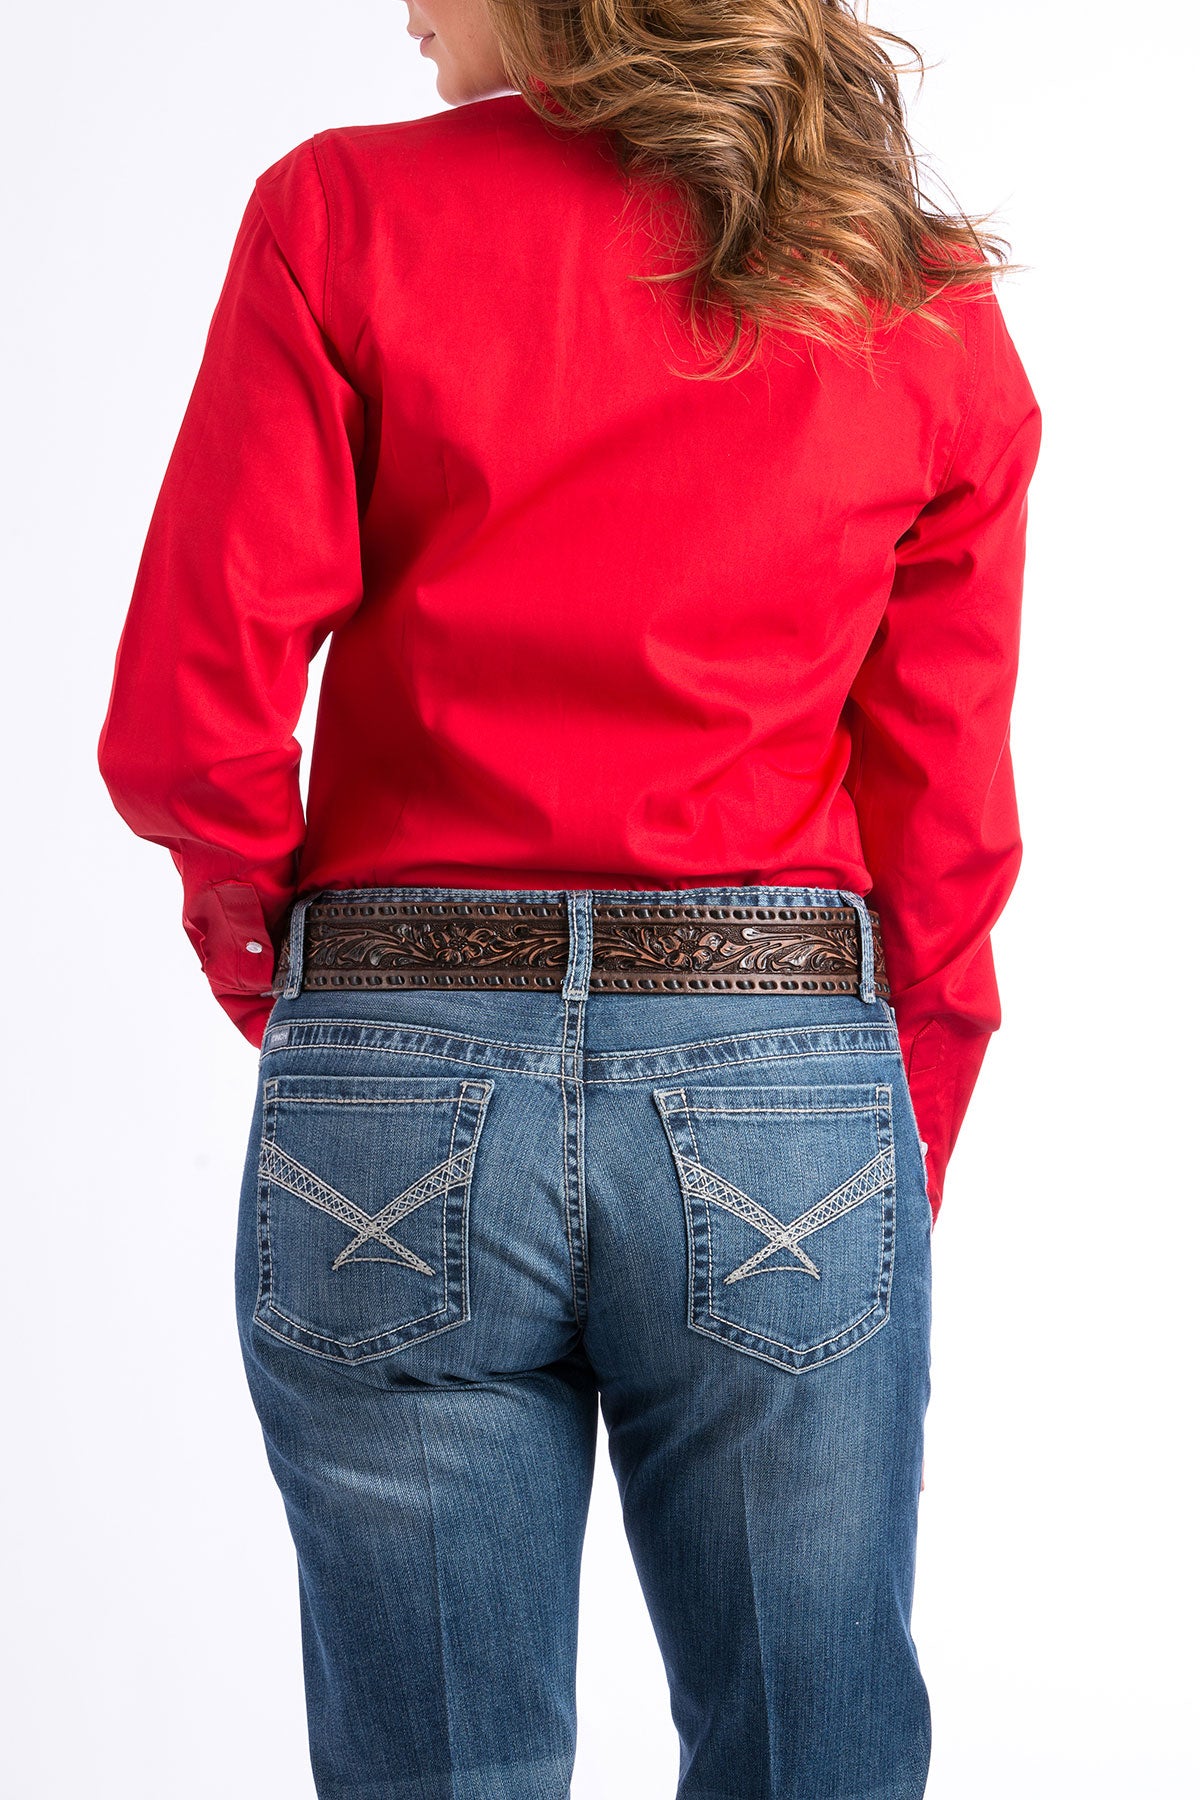 CINCH Women's Solid Red Button-Down Western Shirt